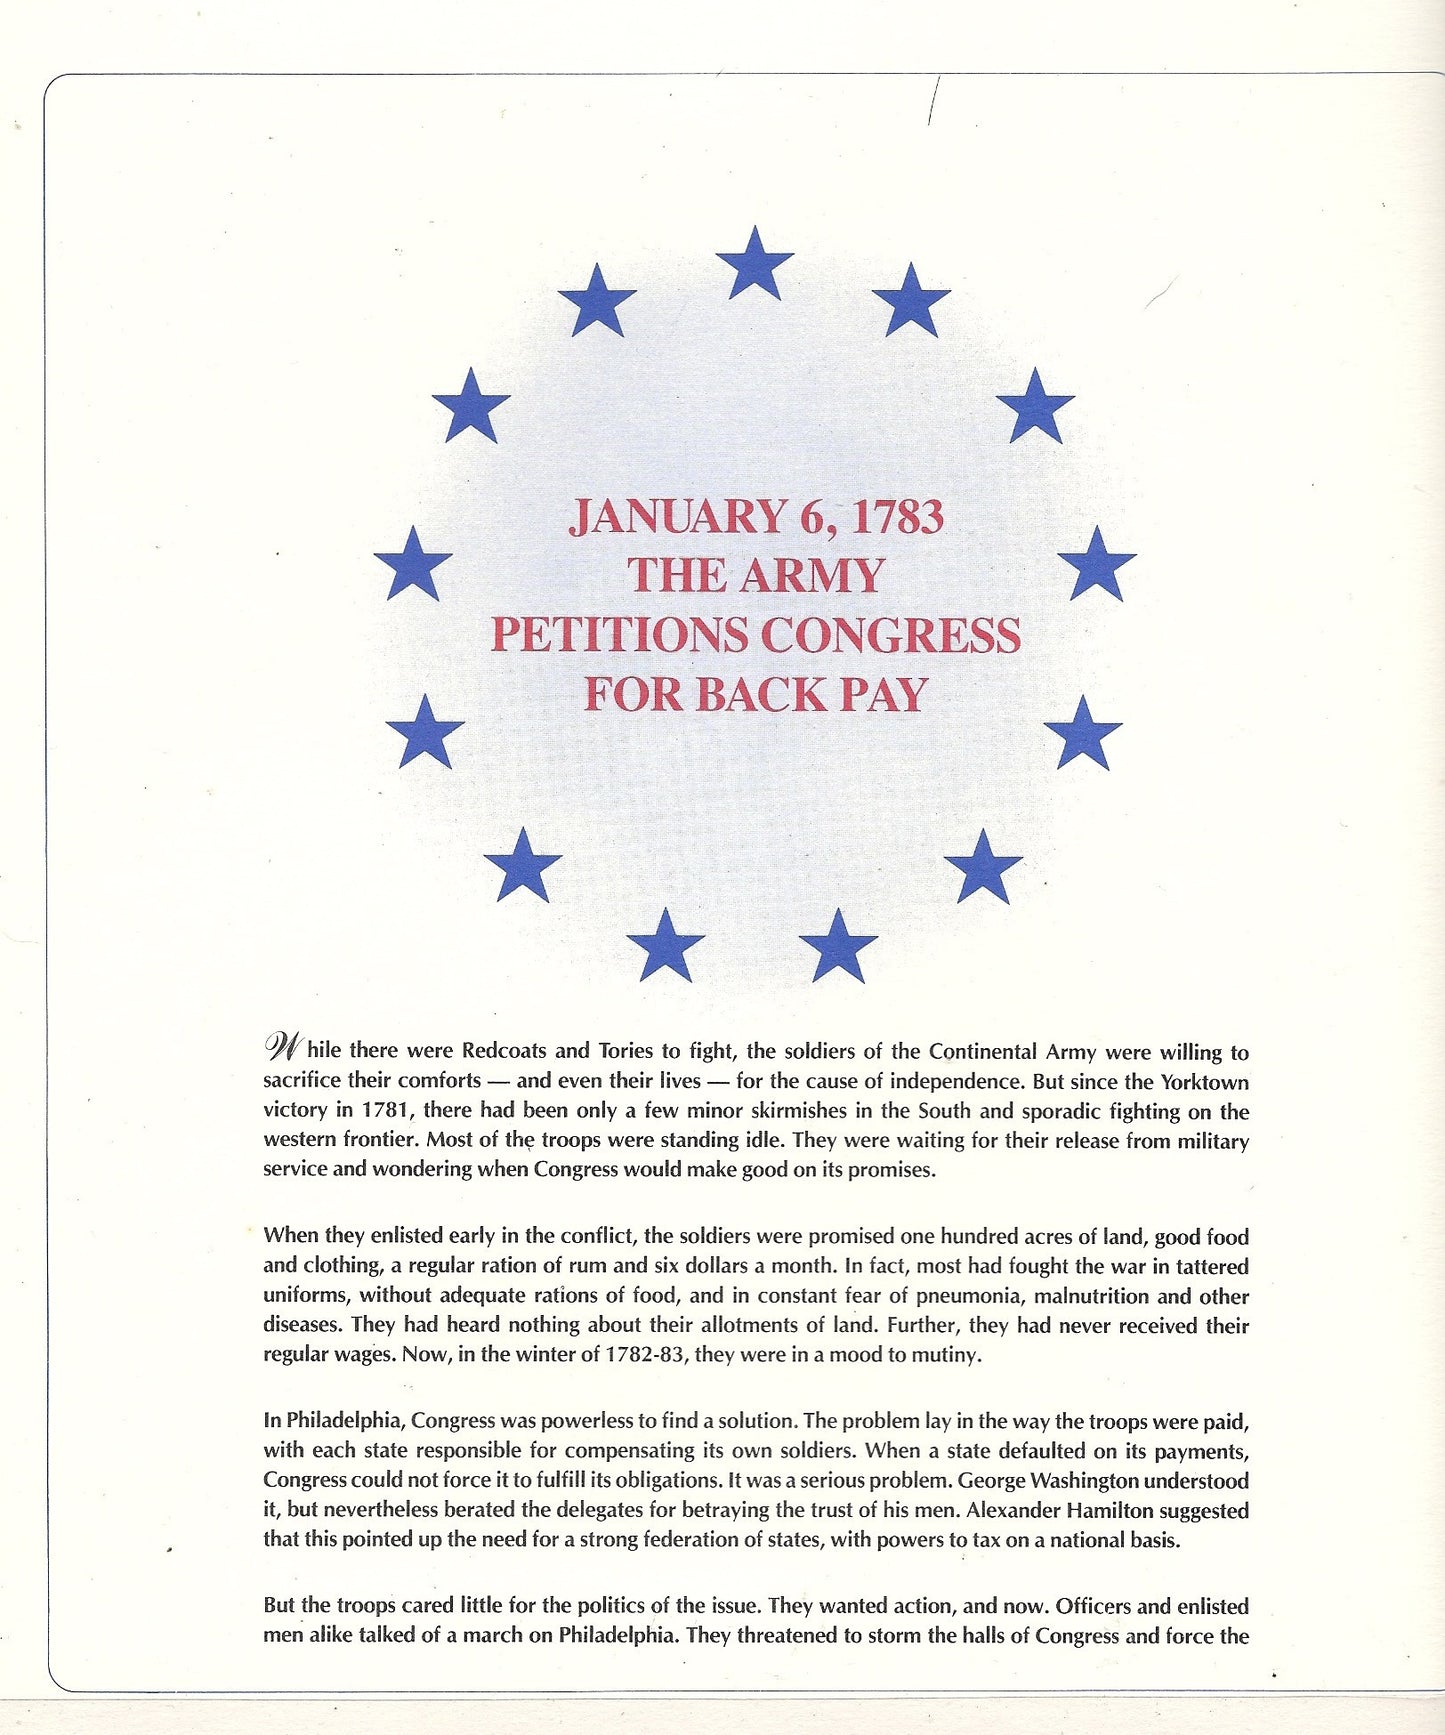 01 06 1986 FDC WH Army Petitions Congress for Back Pay